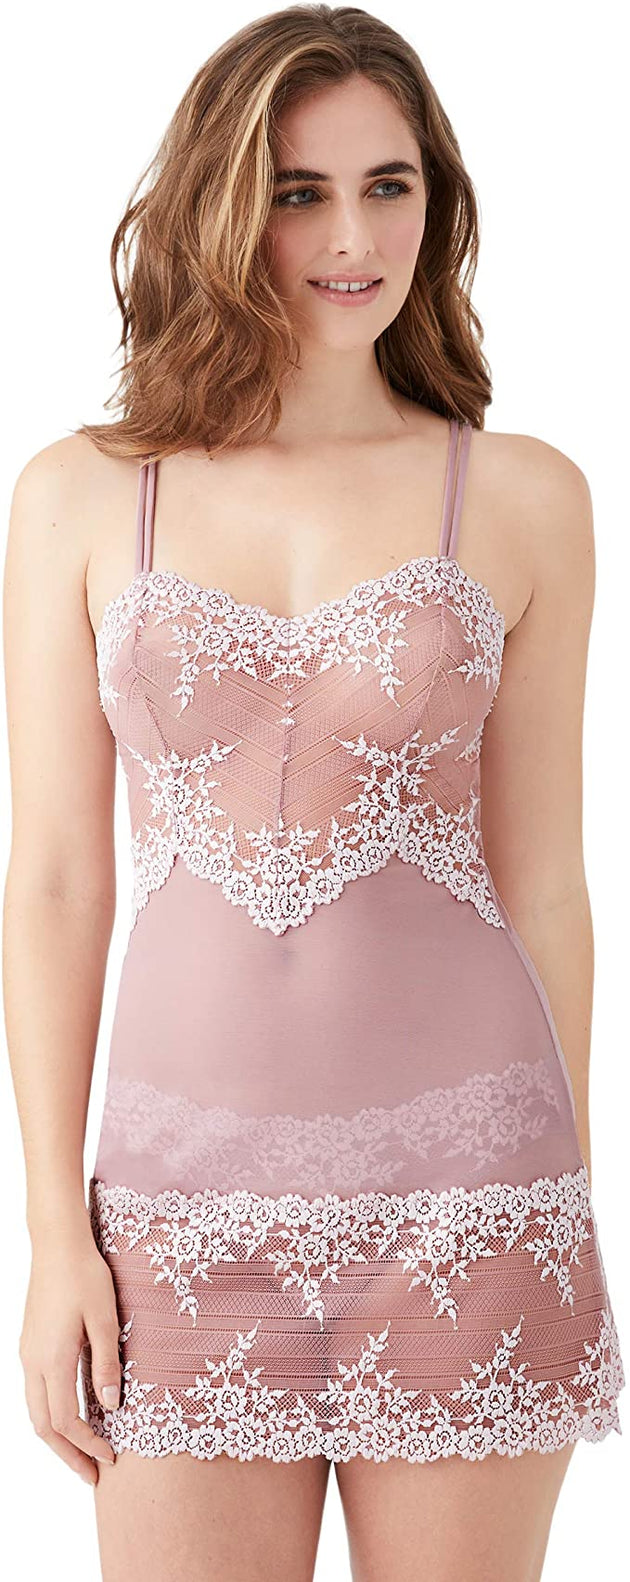 Wacoal 'Embrace Lace' Chemise (2 colors)~ 814191 - Knickers of